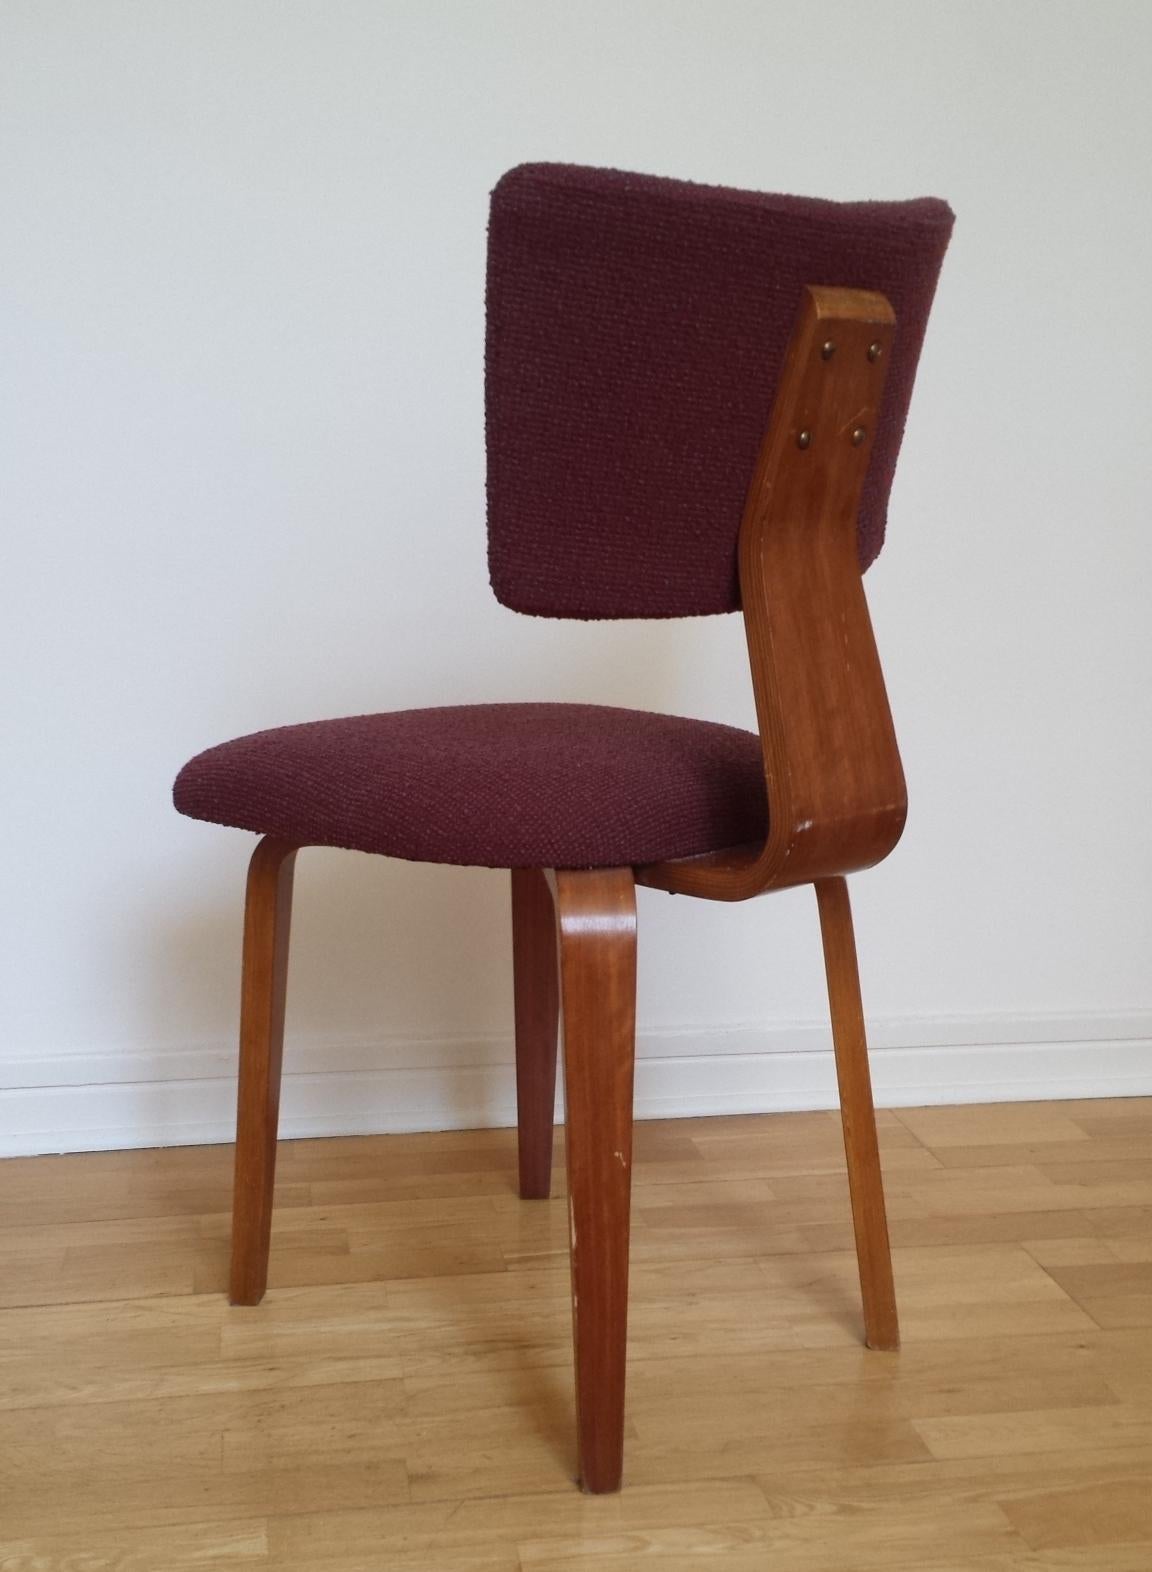 Four Blond Wood Dining Chairs by Dutch Cor Alons 1950s In Excellent Condition For Sale In London, GB